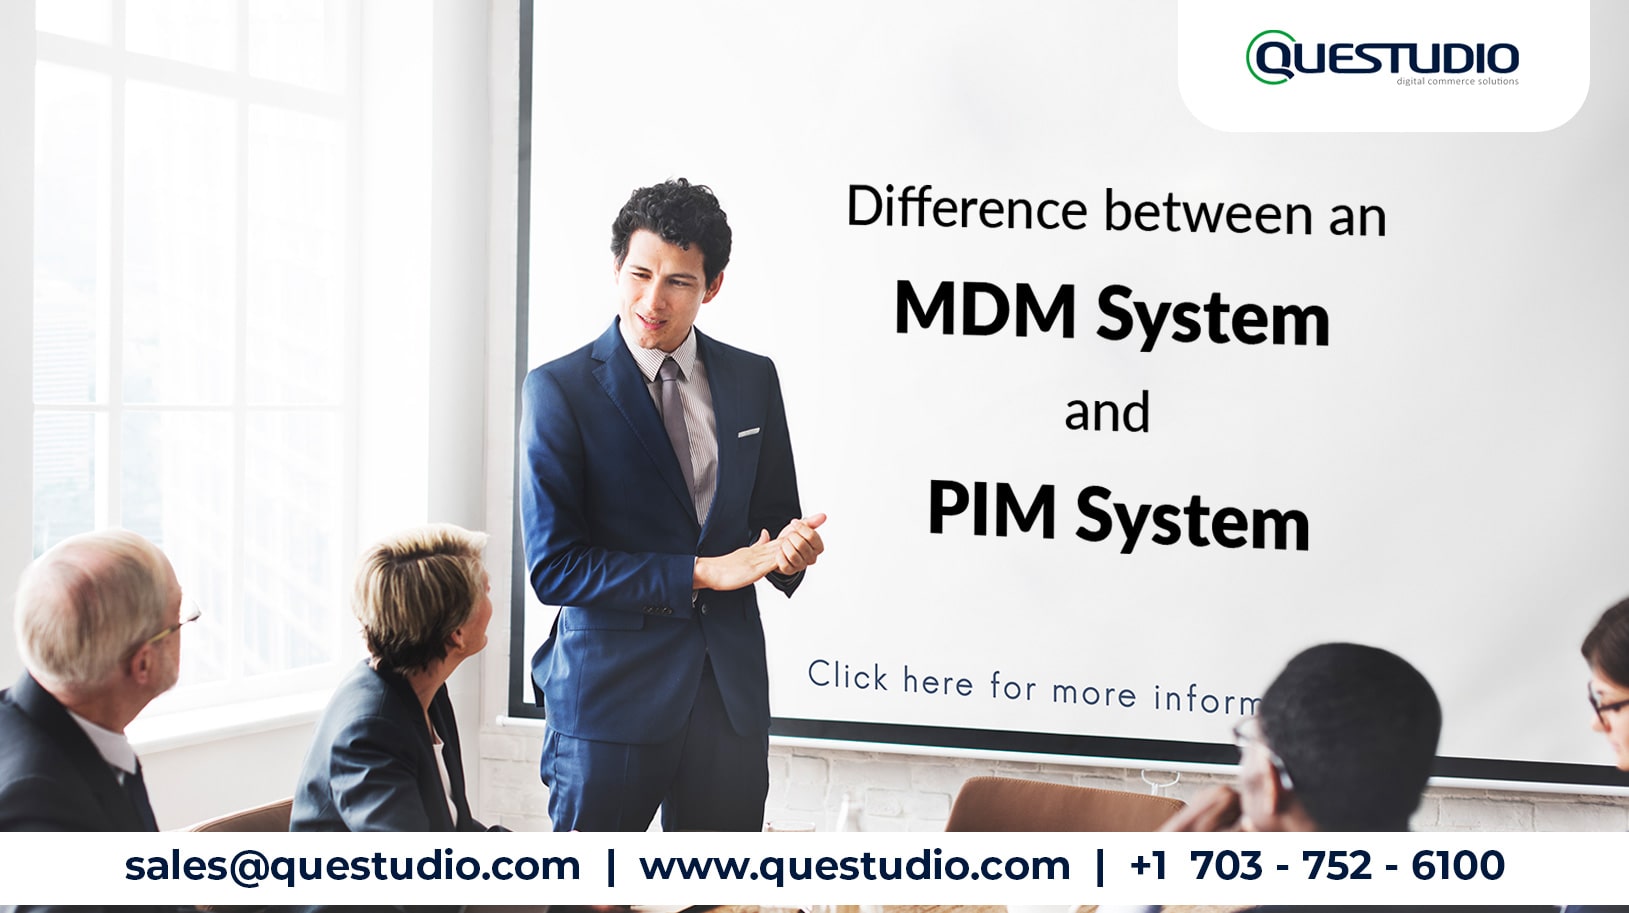 Difference between an MDM System and PIM System